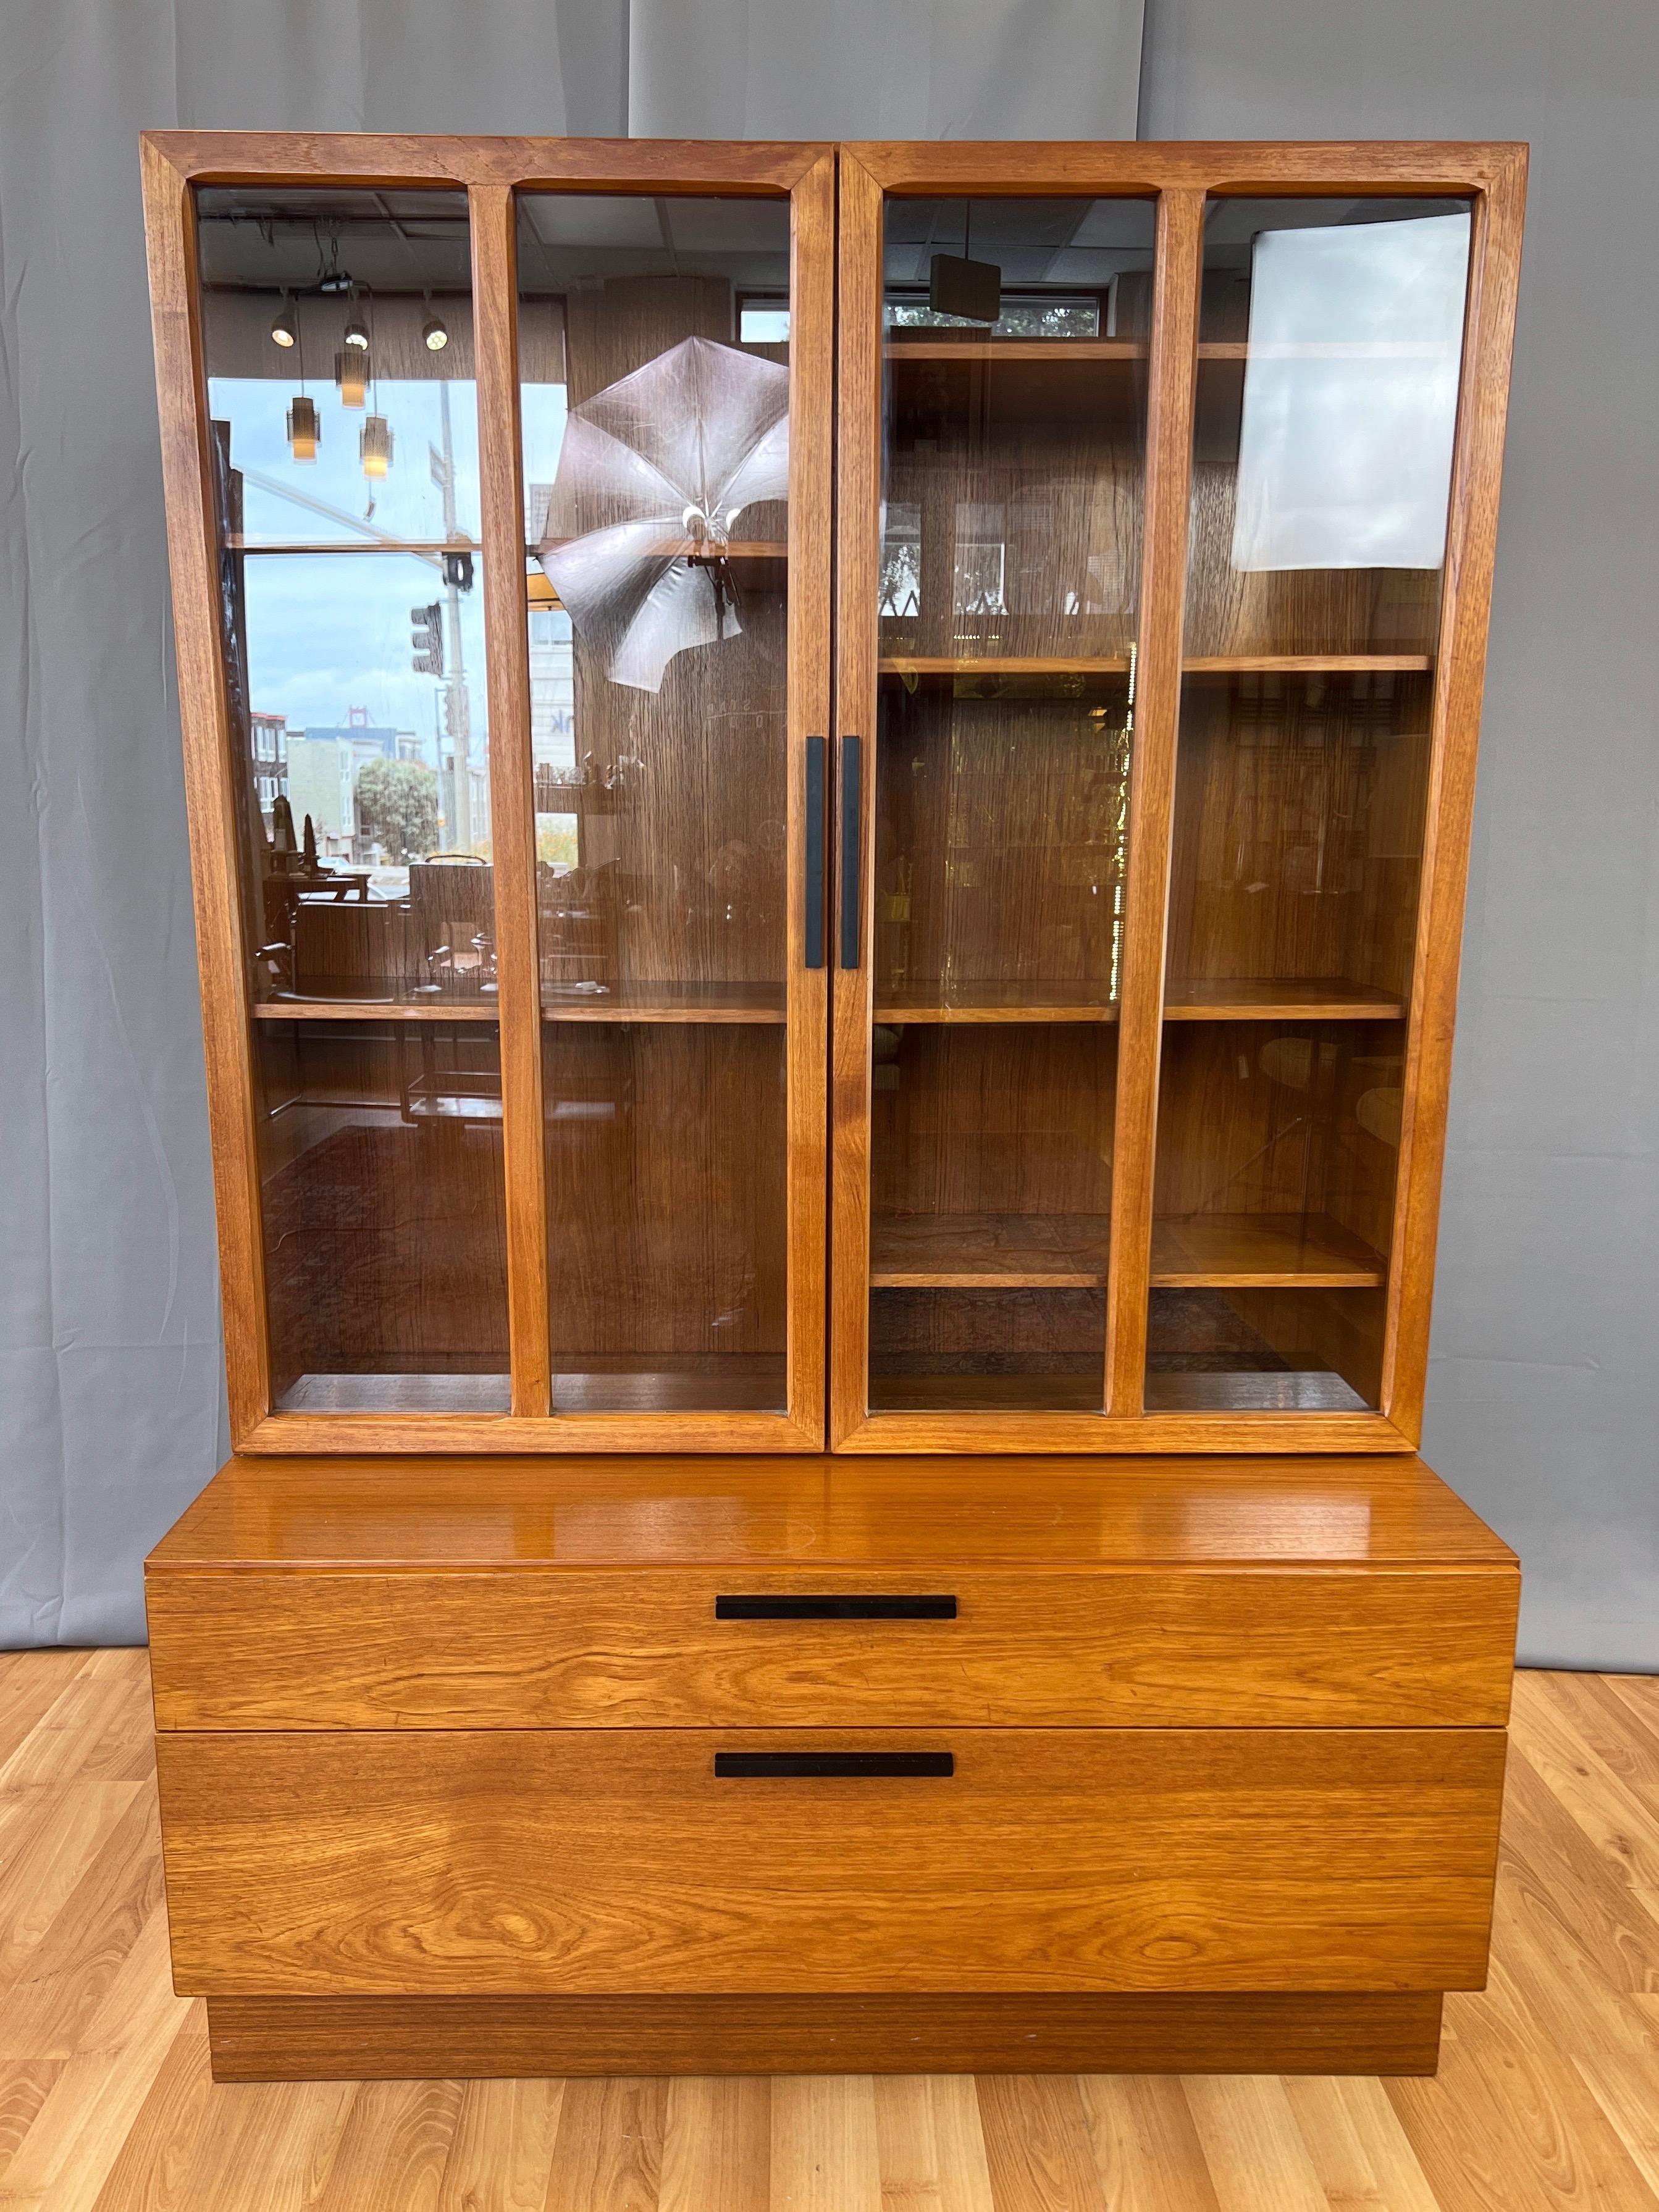 A very handsome and spacious circa 1970 Danish modern teak wall unit by Ib Kofod-Larsen for Faarup Møbelfabrik, comprised of an upper display cabinet with glass doors and adjustable shelves sitting atop a lower cabinet with drawers.

Features the